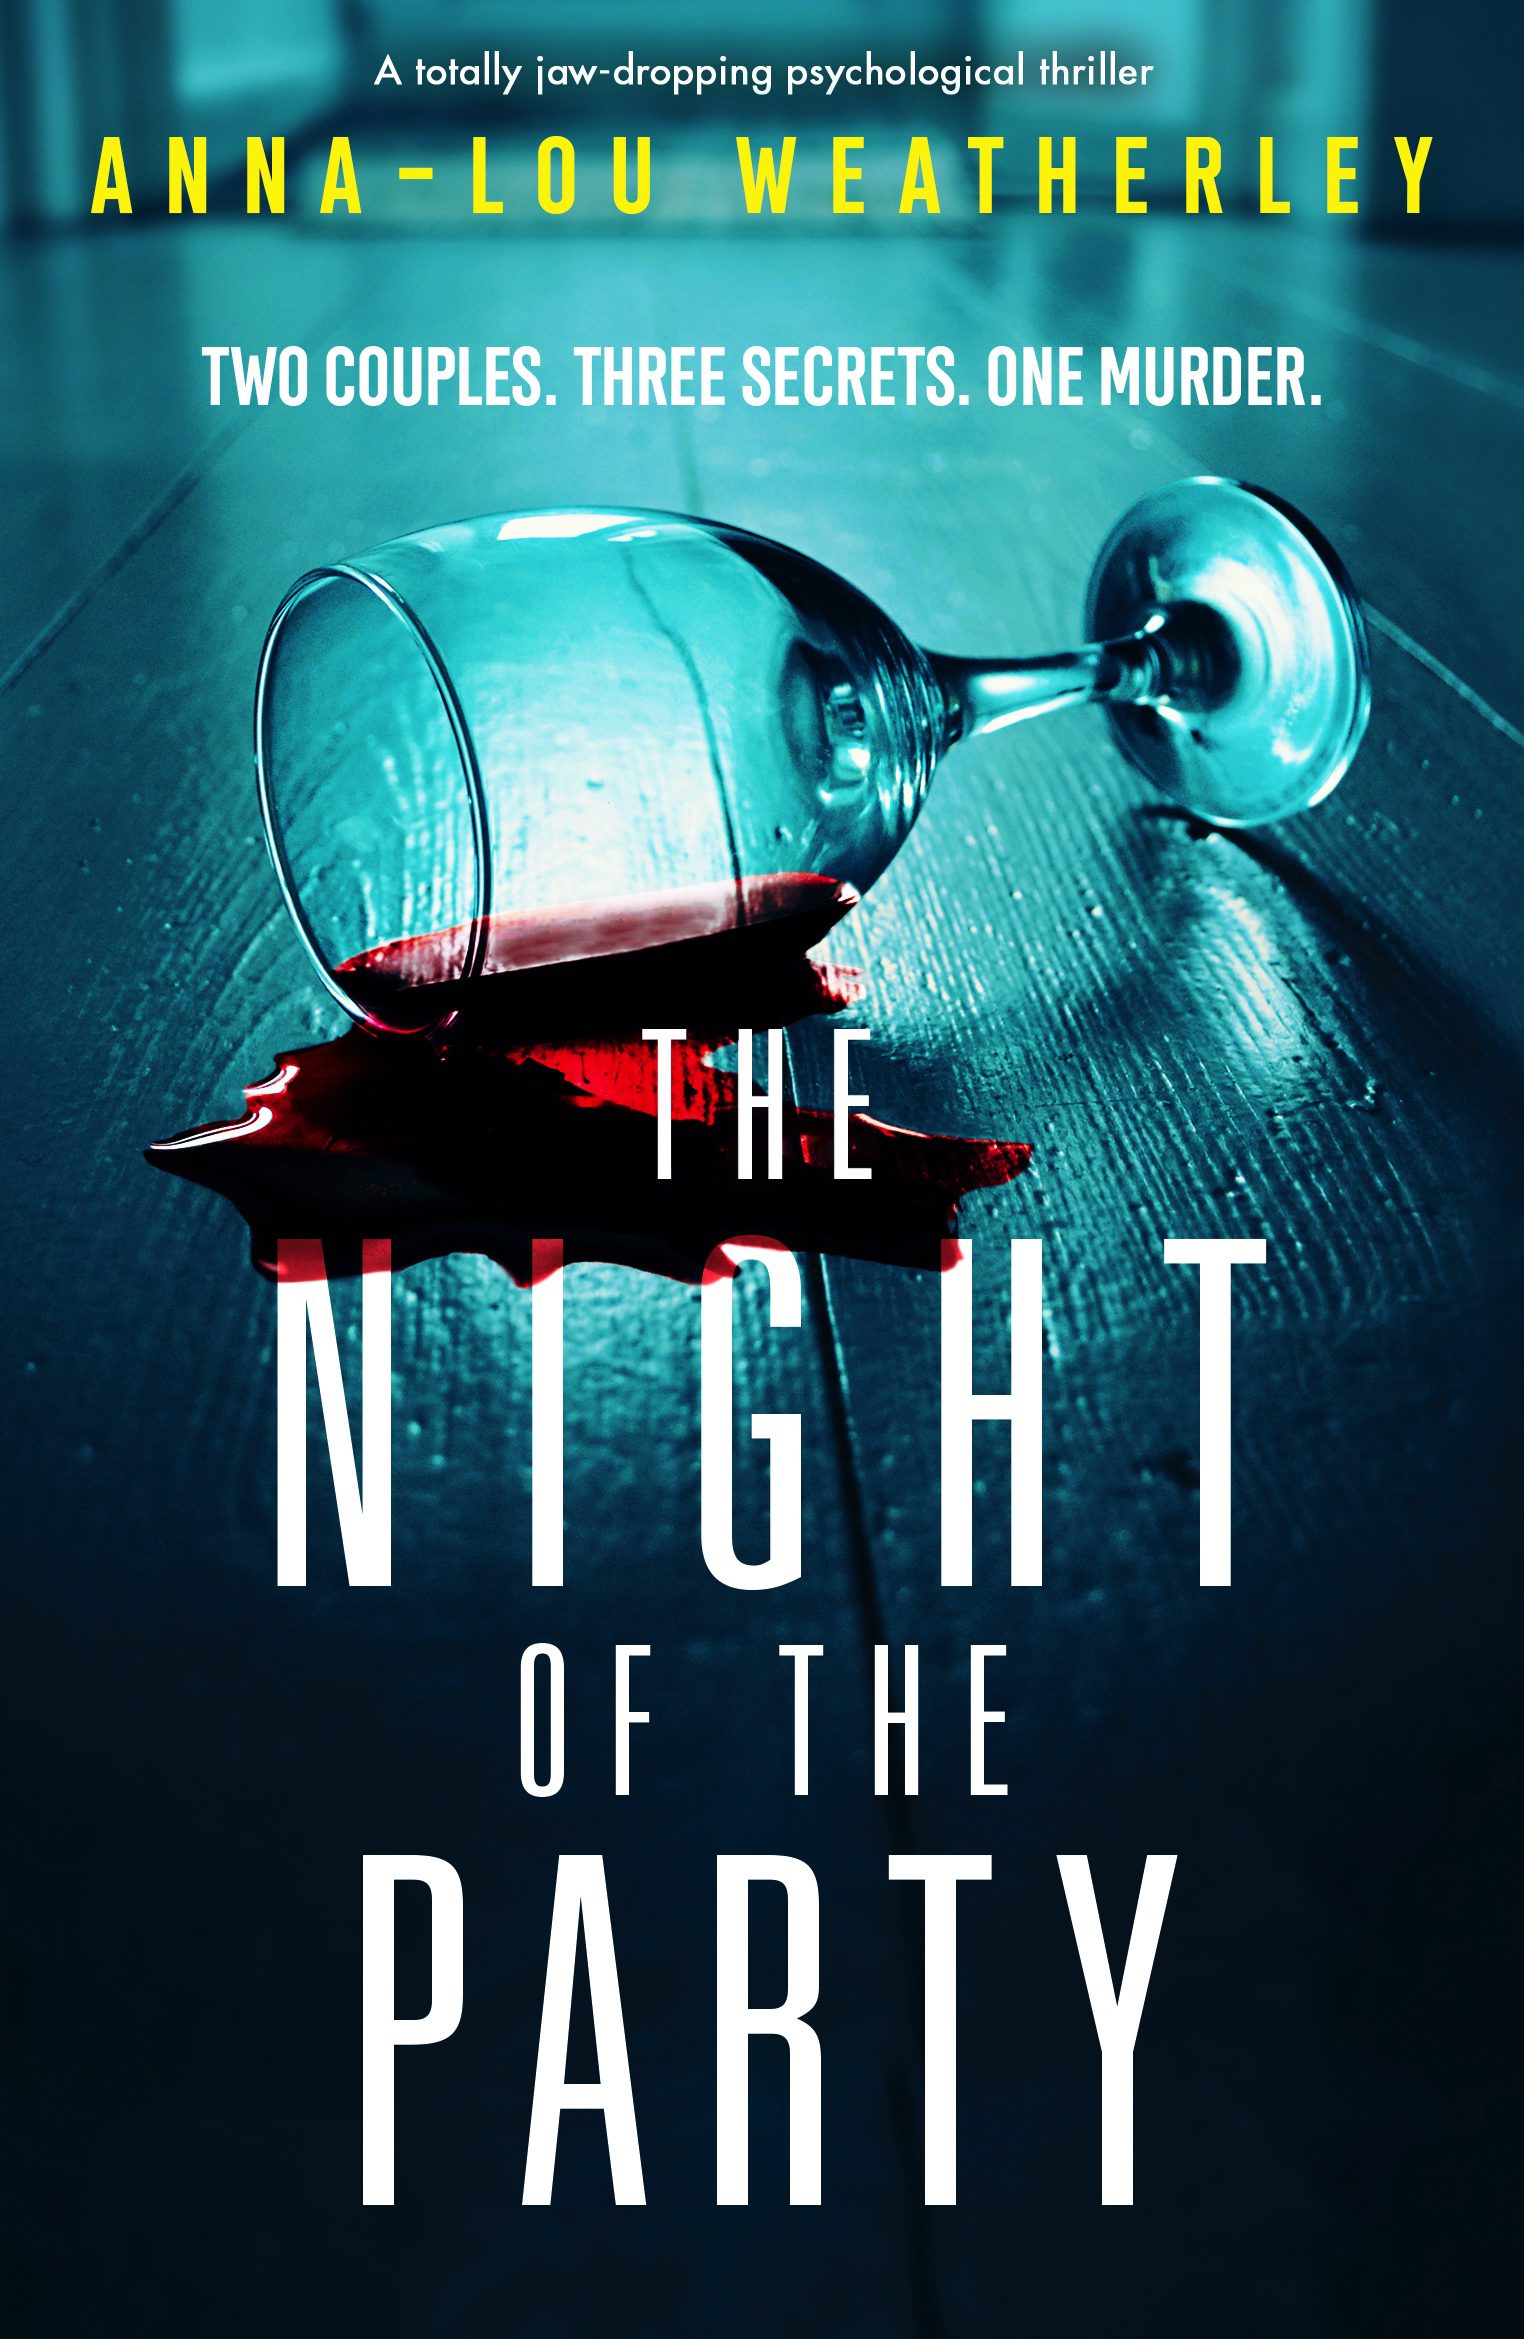 The Night of the Party book cover